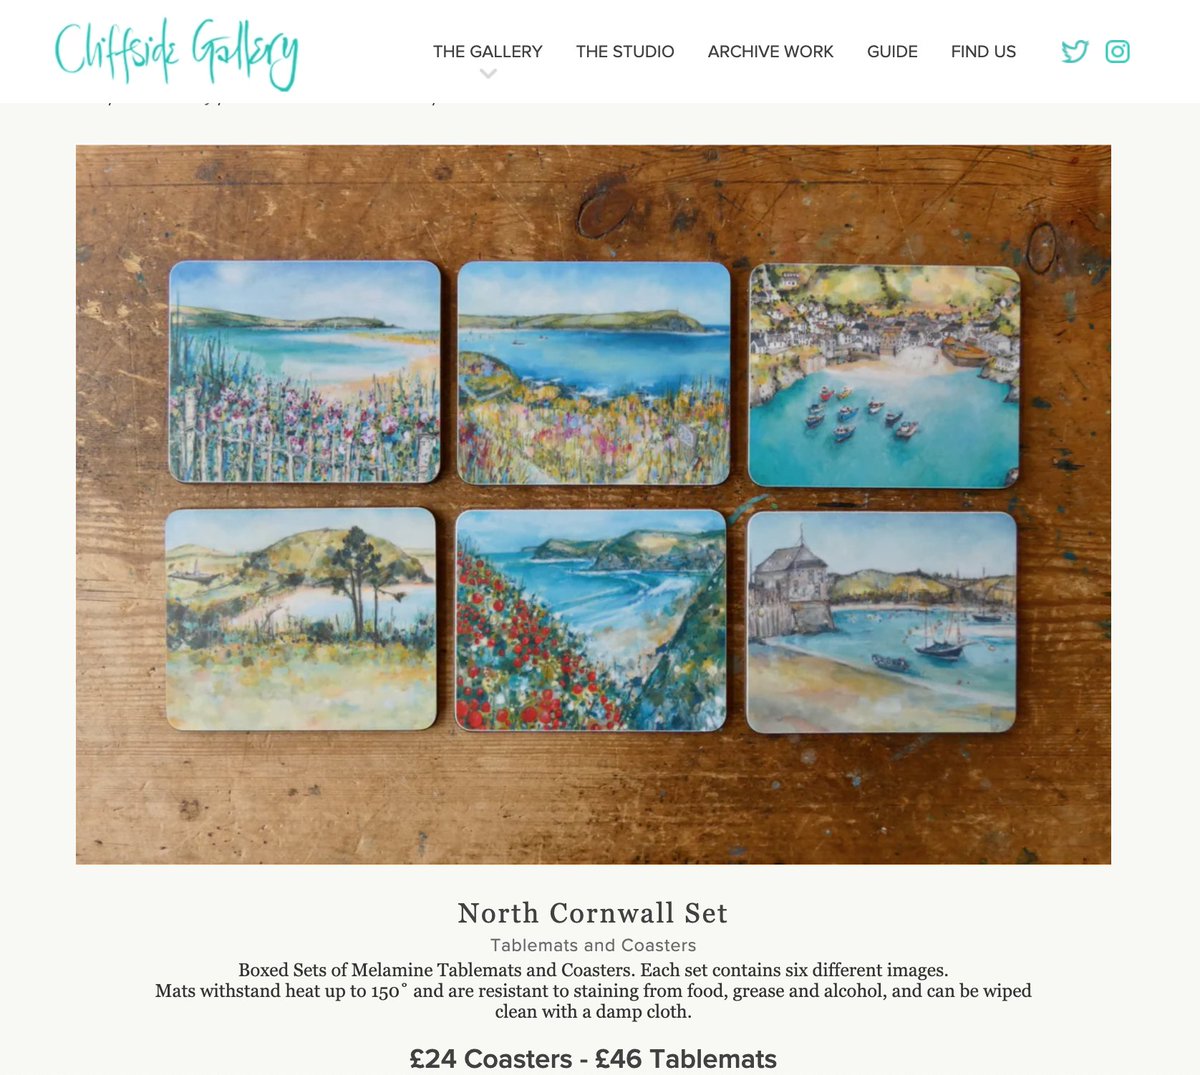 New North Cornwall Tablemat and Coasters Sets on the shelves, packed with Port Isaac on top. #tableware #tablemats #coasters #Cornwall